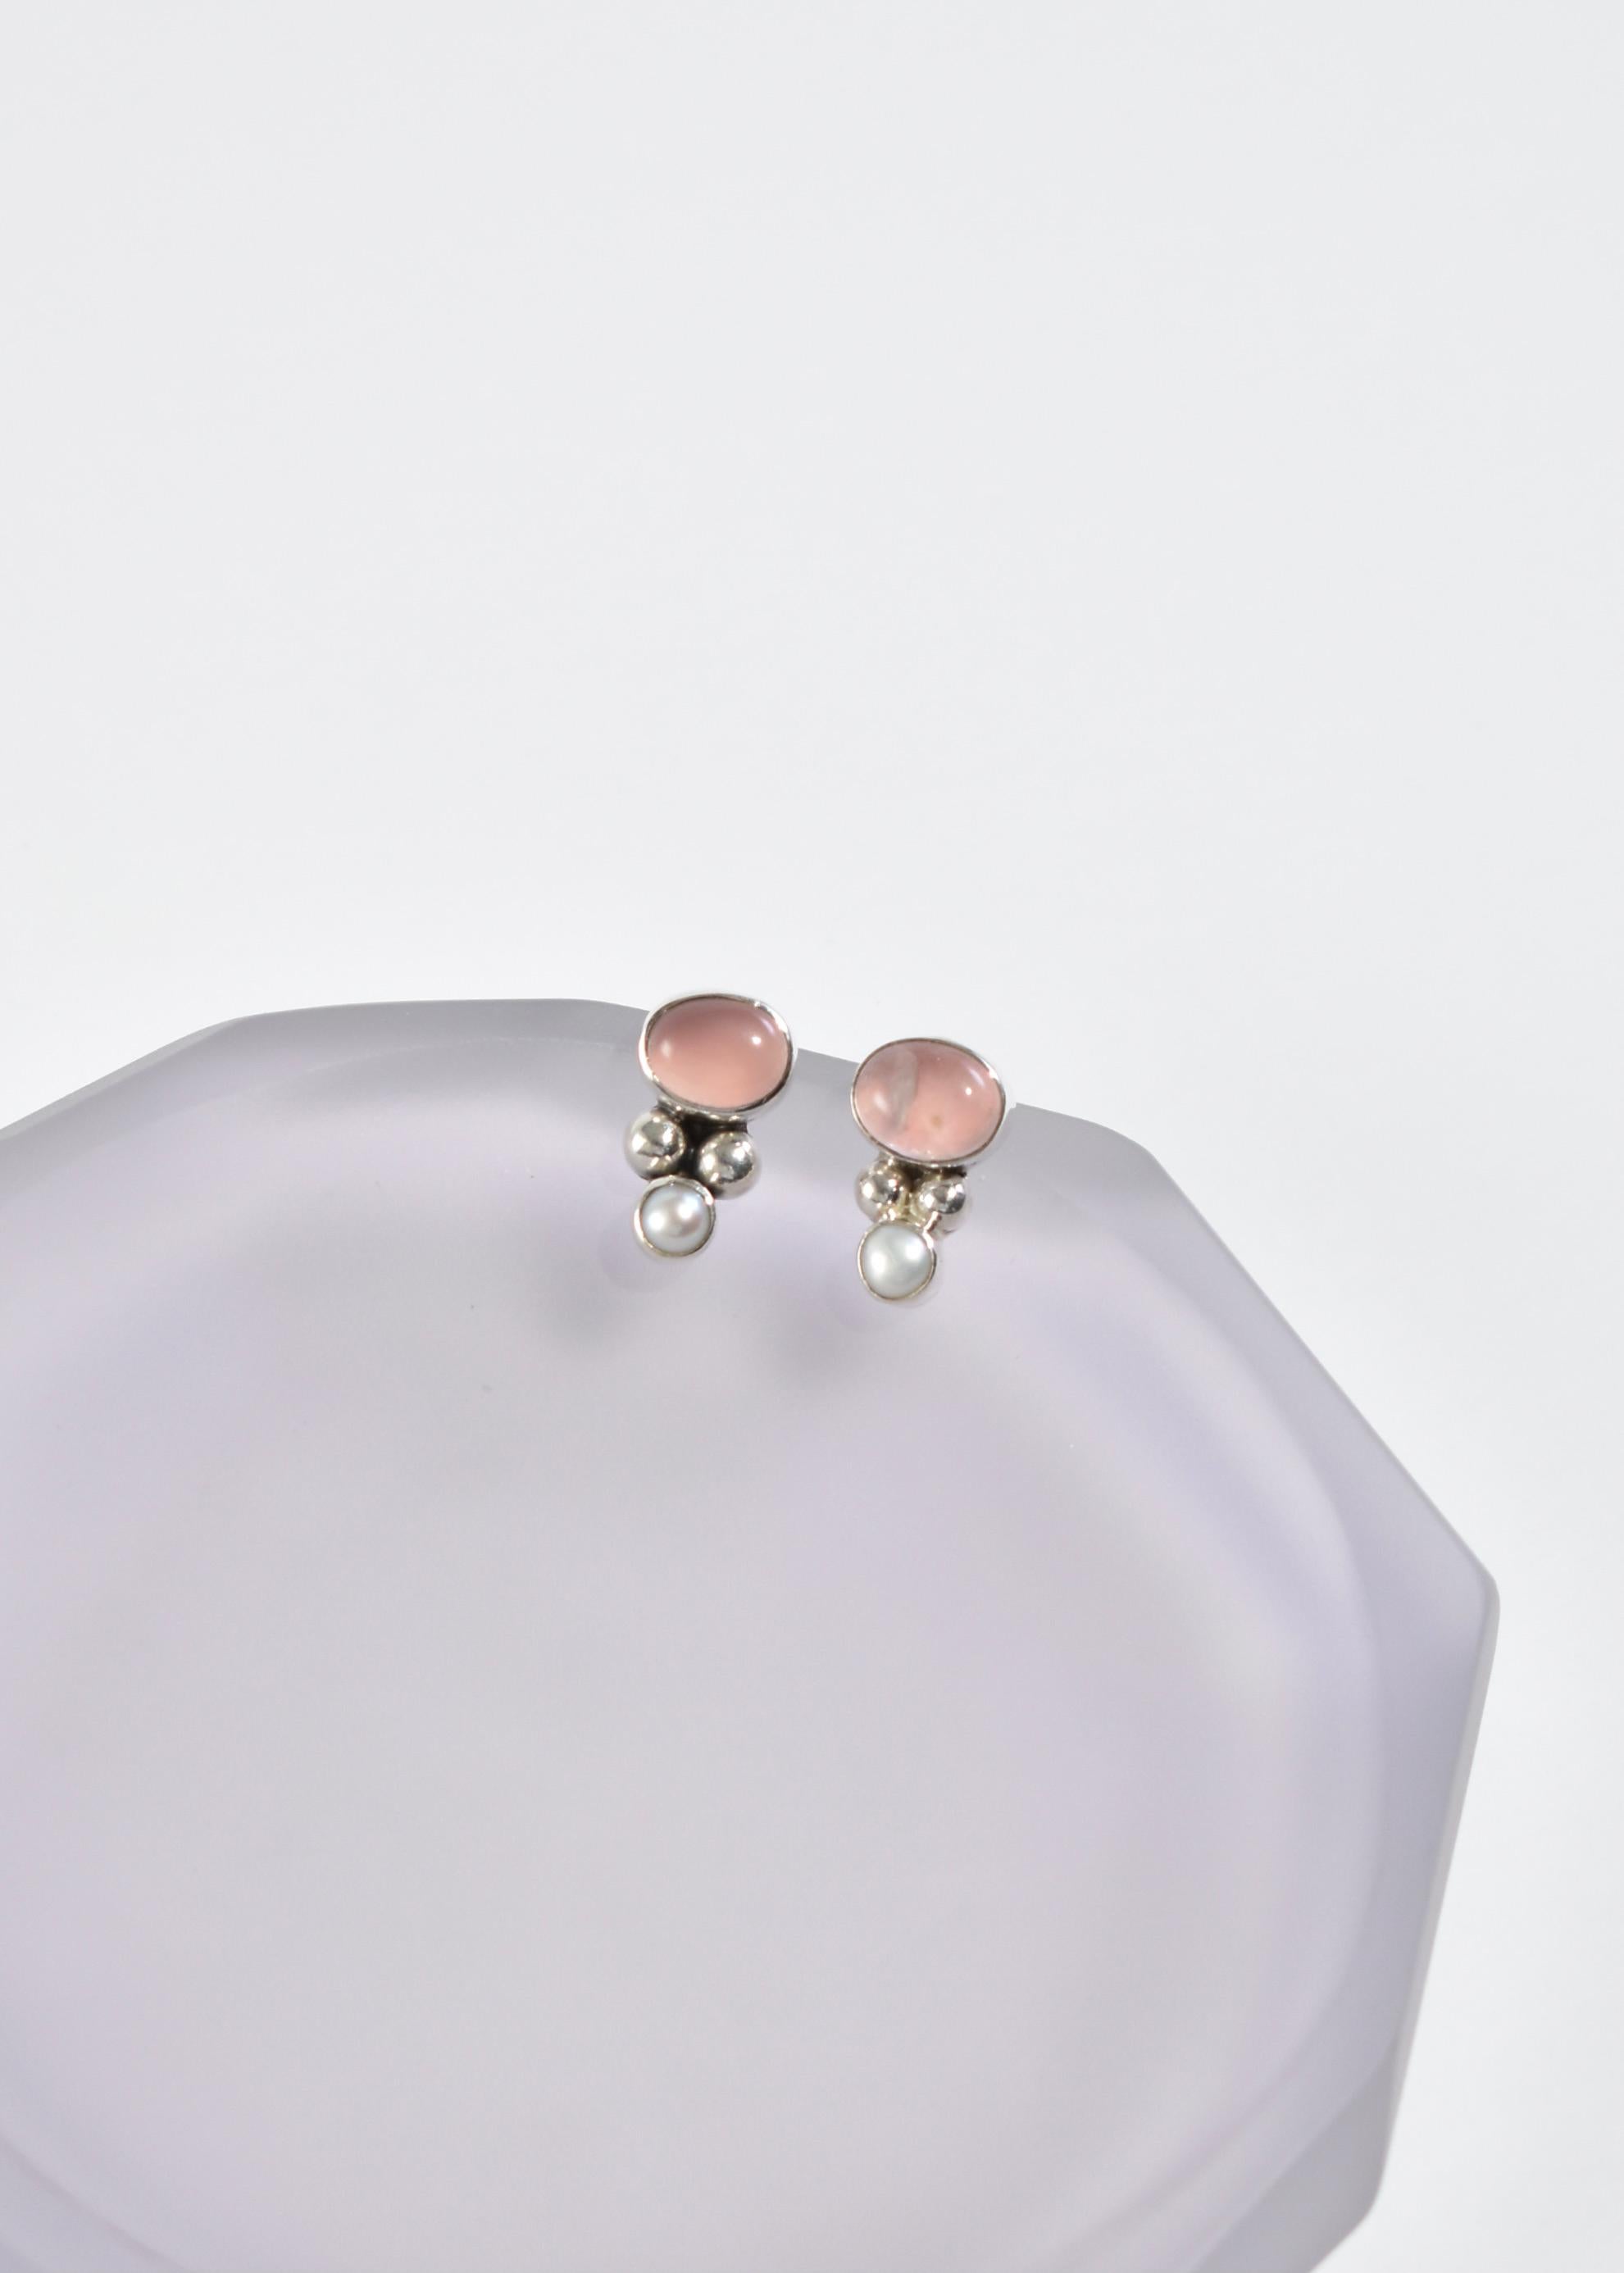 Vintage sterling earrings with pink quartz and pearl stones, pierced. Stamped 925.

Material: Sterling silver, pink quartz, pearl.

